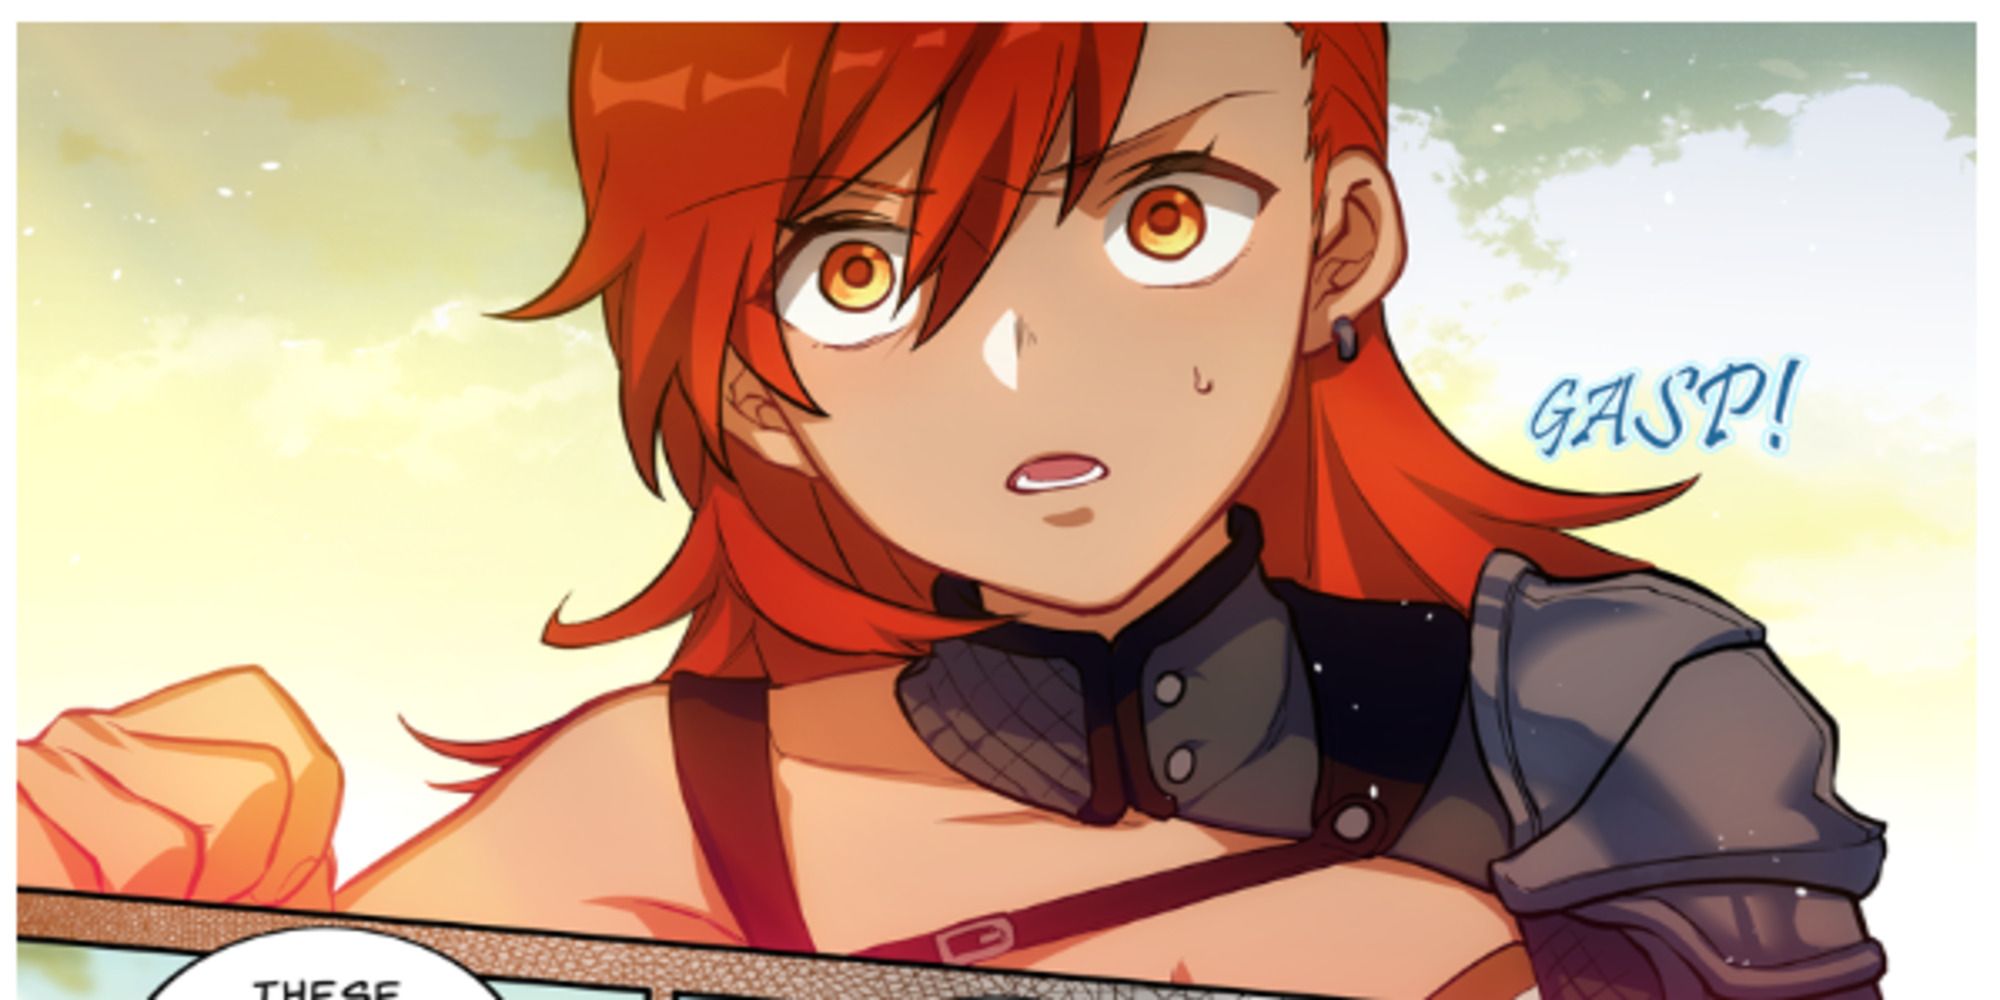 A screenshot of Venessa gasping on the game's comic.